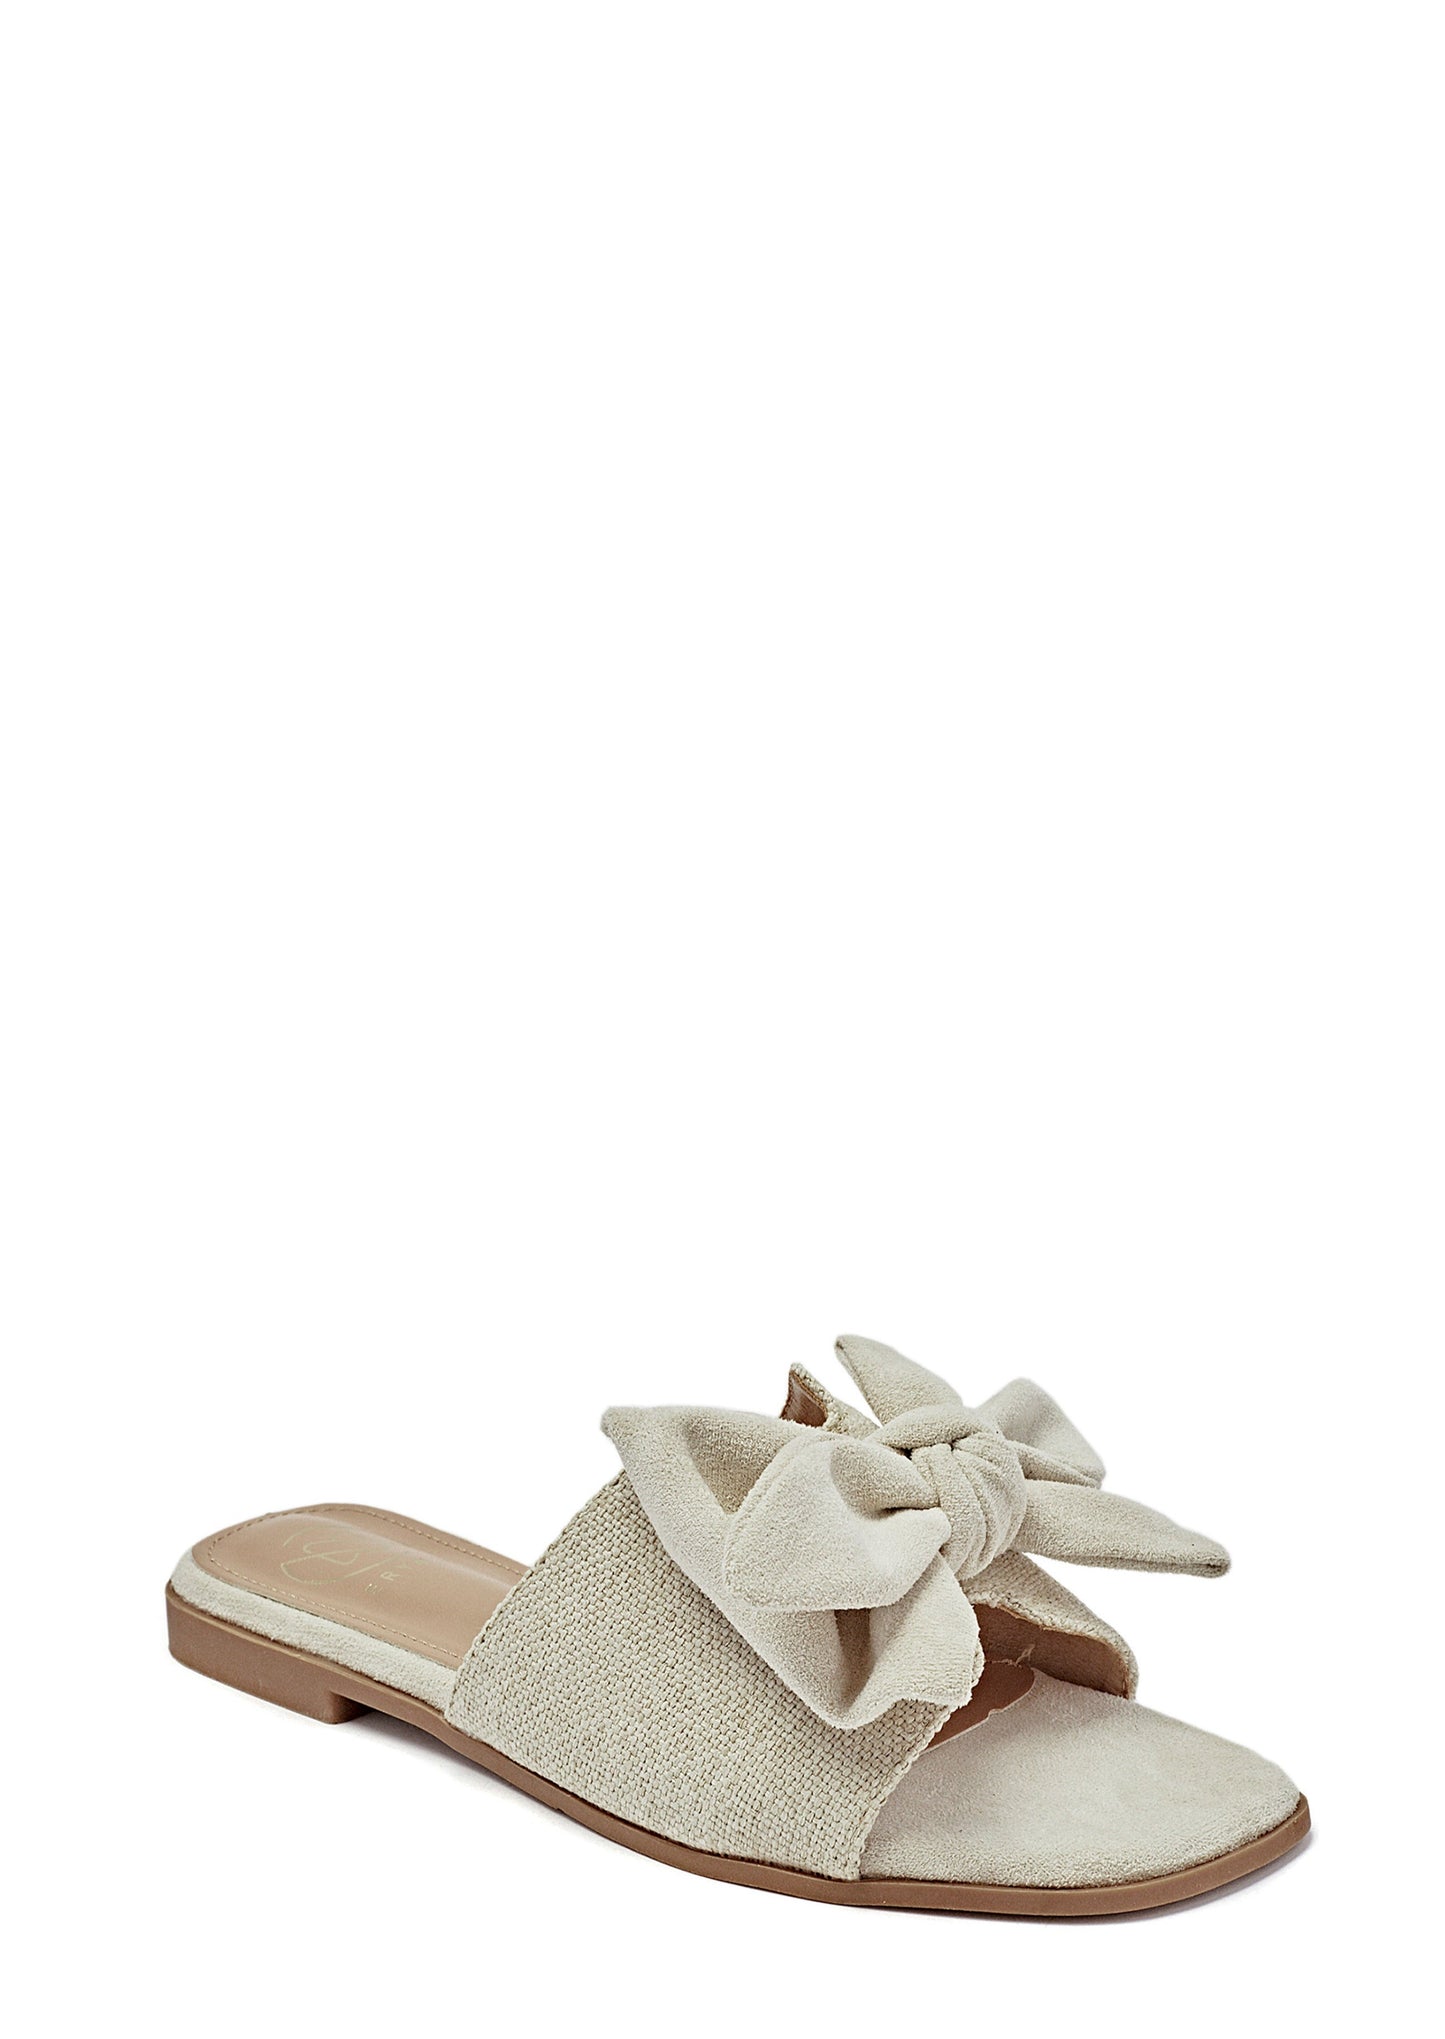 BEIGE BOW SLIPPERS